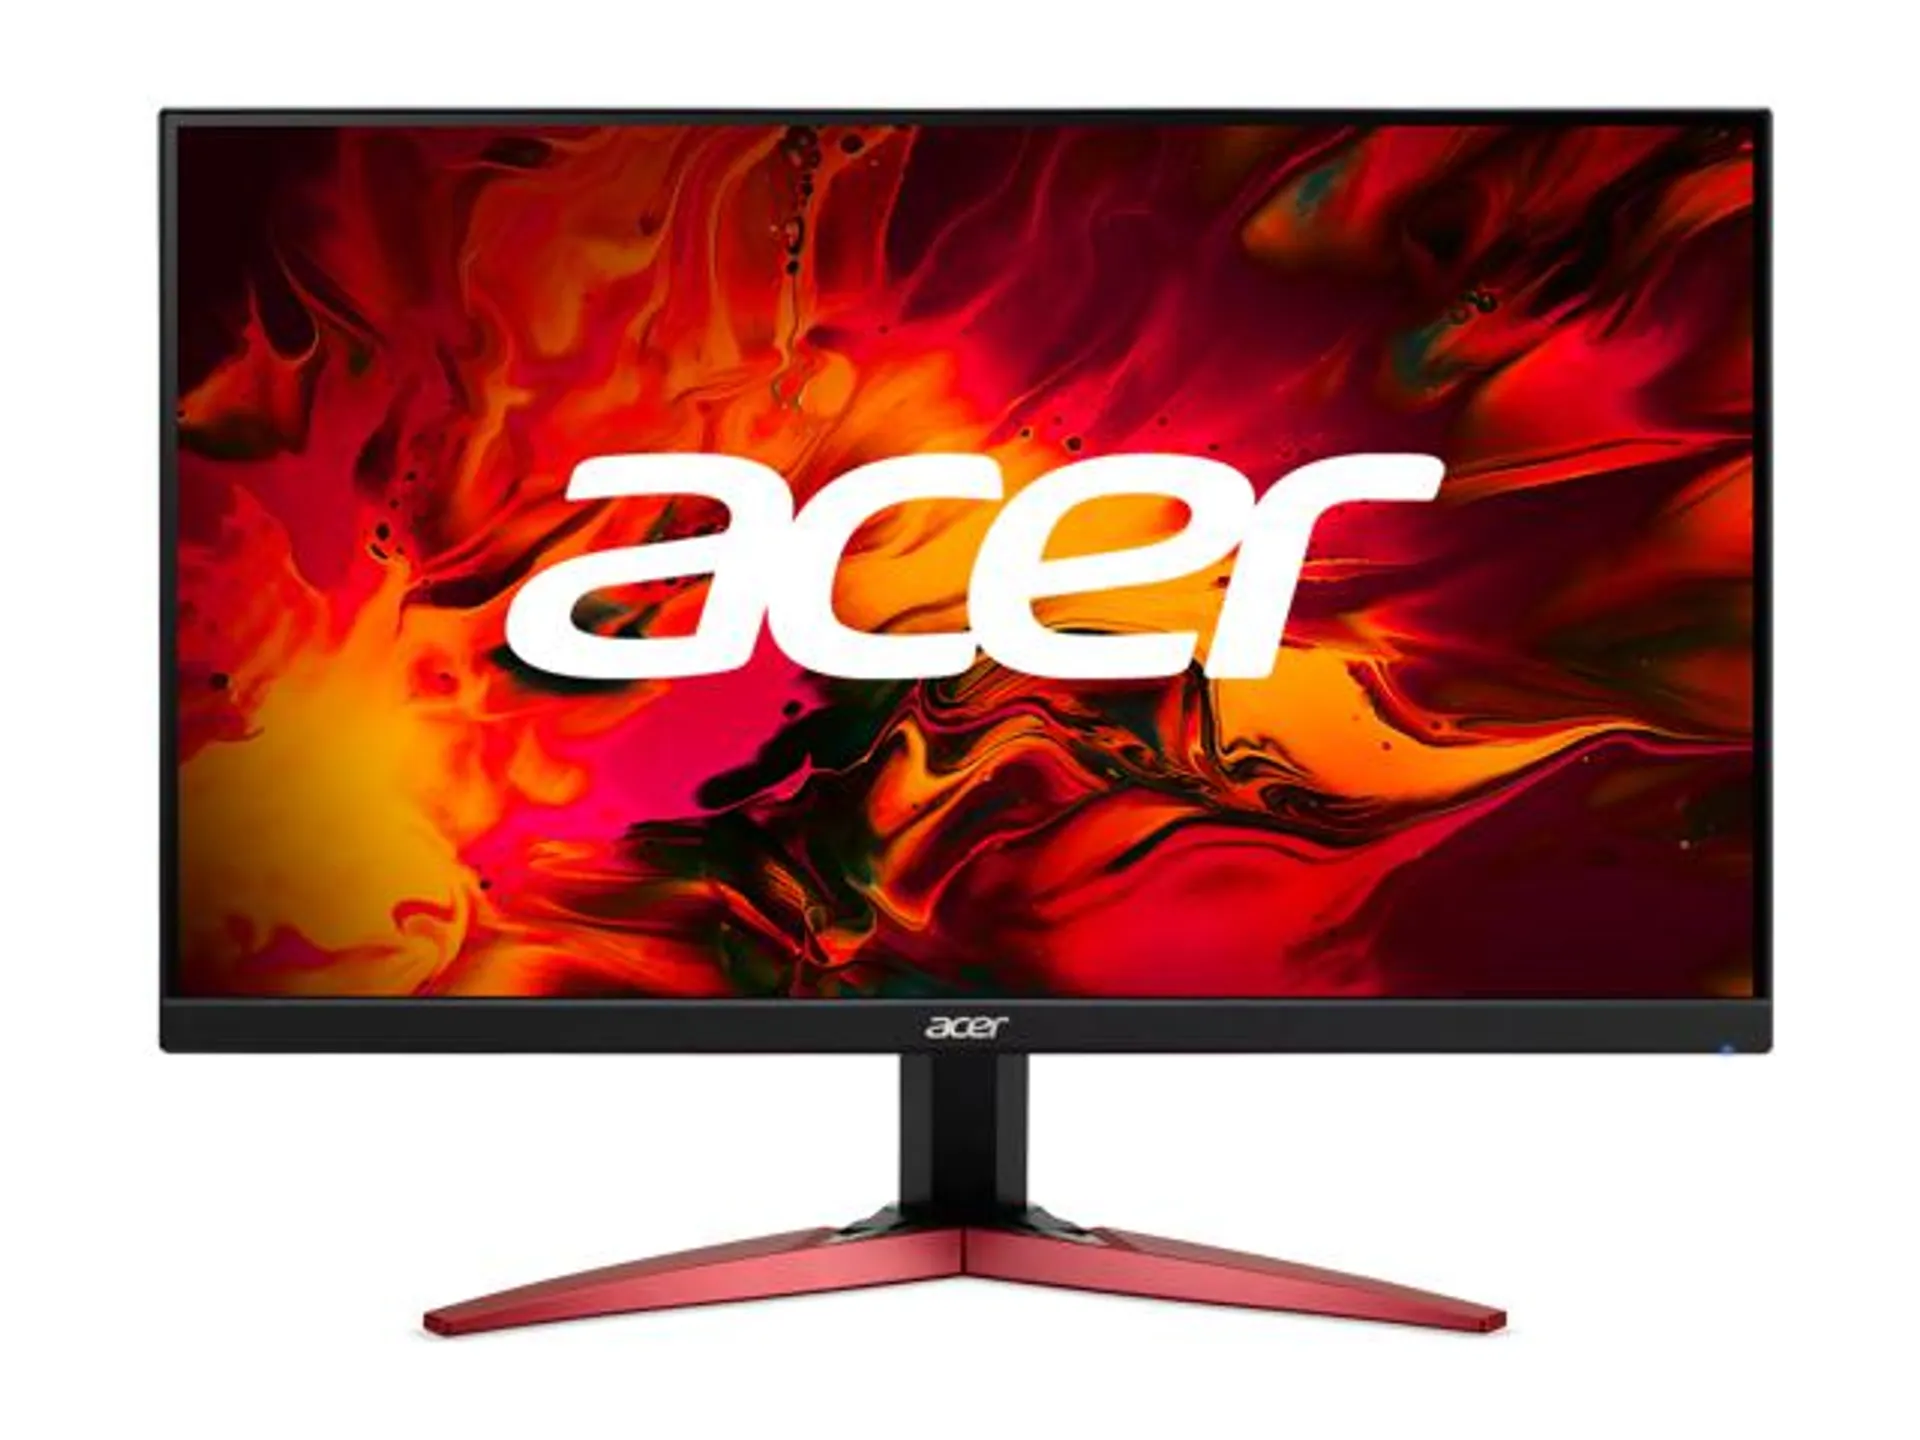 Acer Nitro KG251Q Zbiip 24.5” Full HD (1920 x 1080) Gaming Monitor with AMD FreeSync Premium Technology, Up to 250Hz Refresh Rate, 1ms (VRB), HDR Support